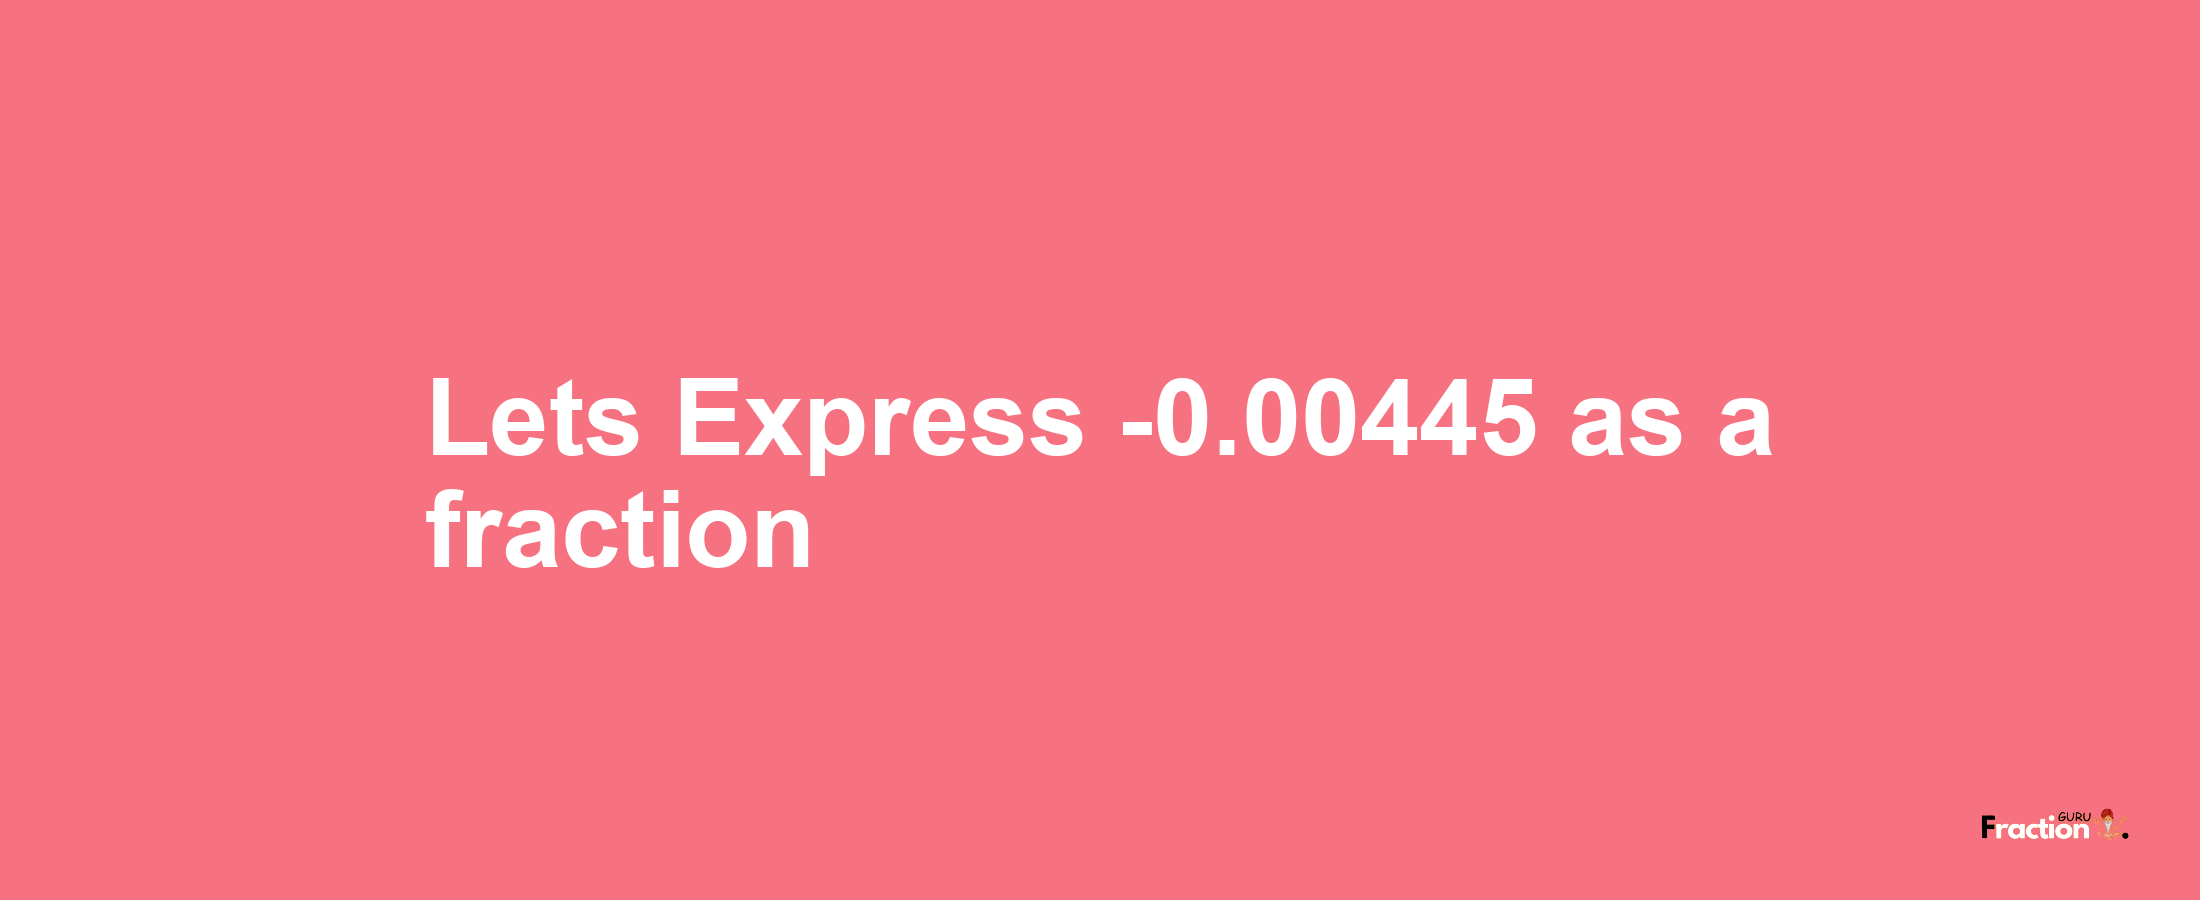 Lets Express -0.00445 as afraction